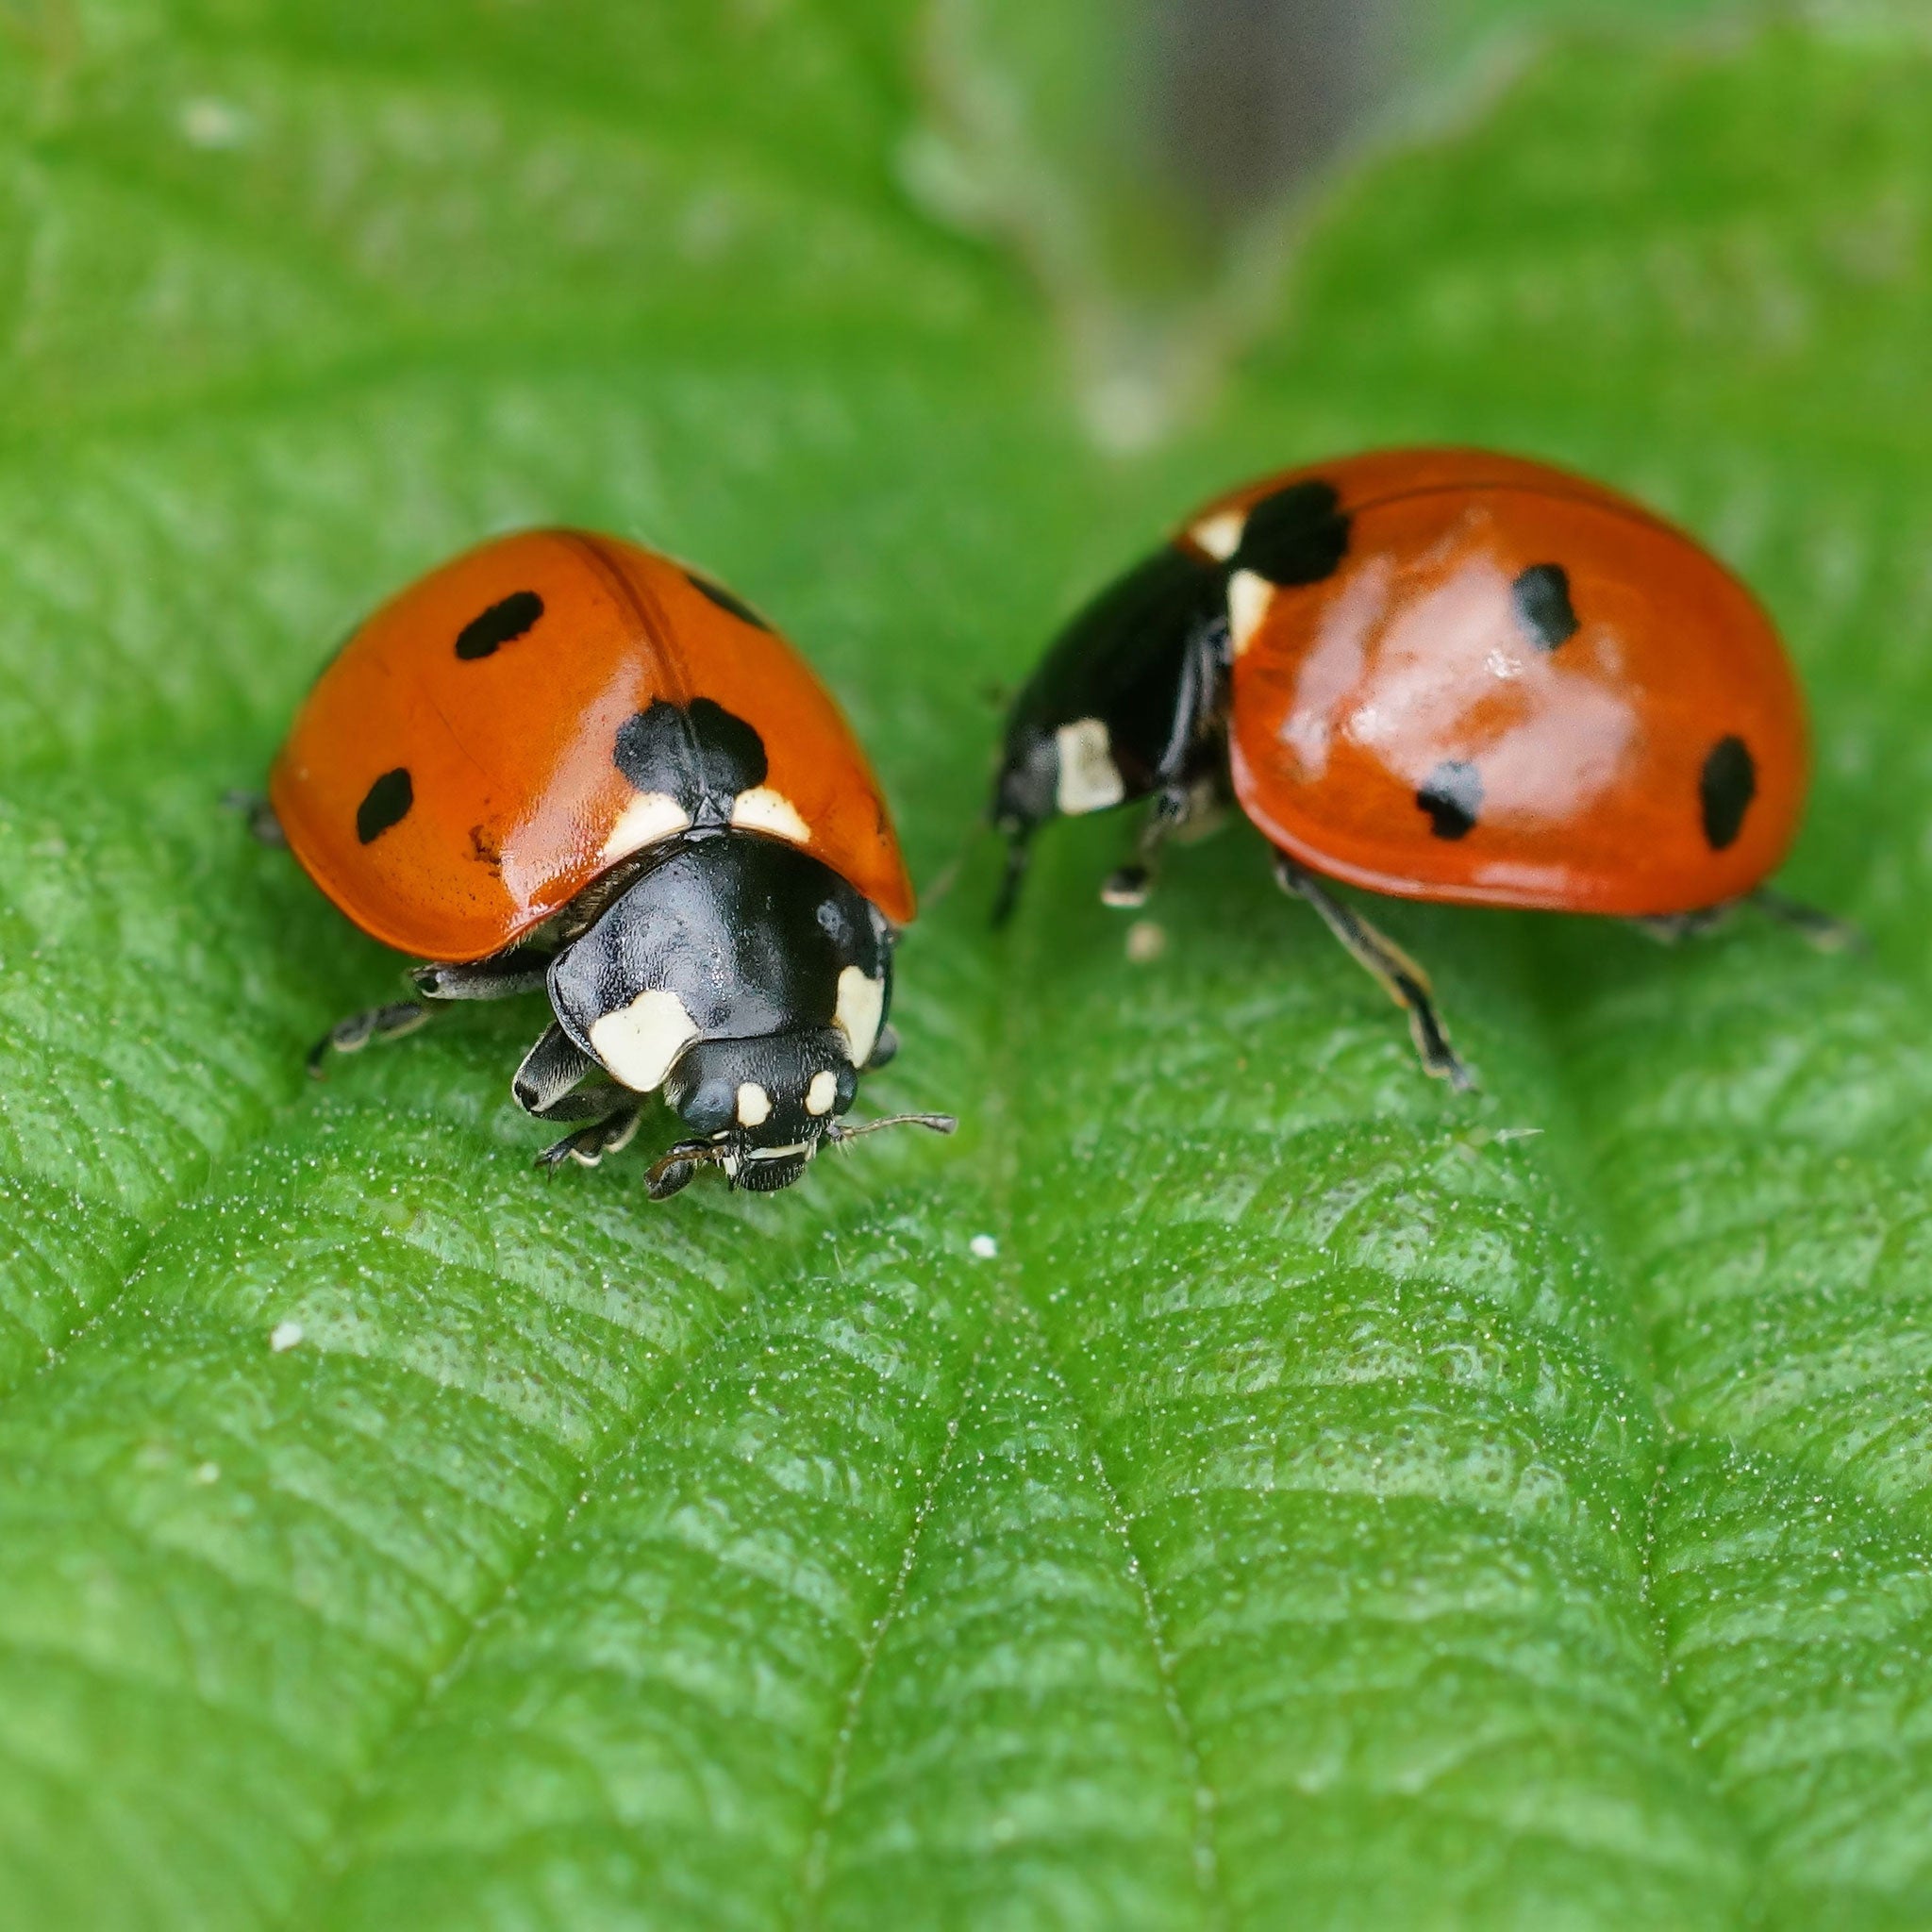 Two ladybirds on a leaf